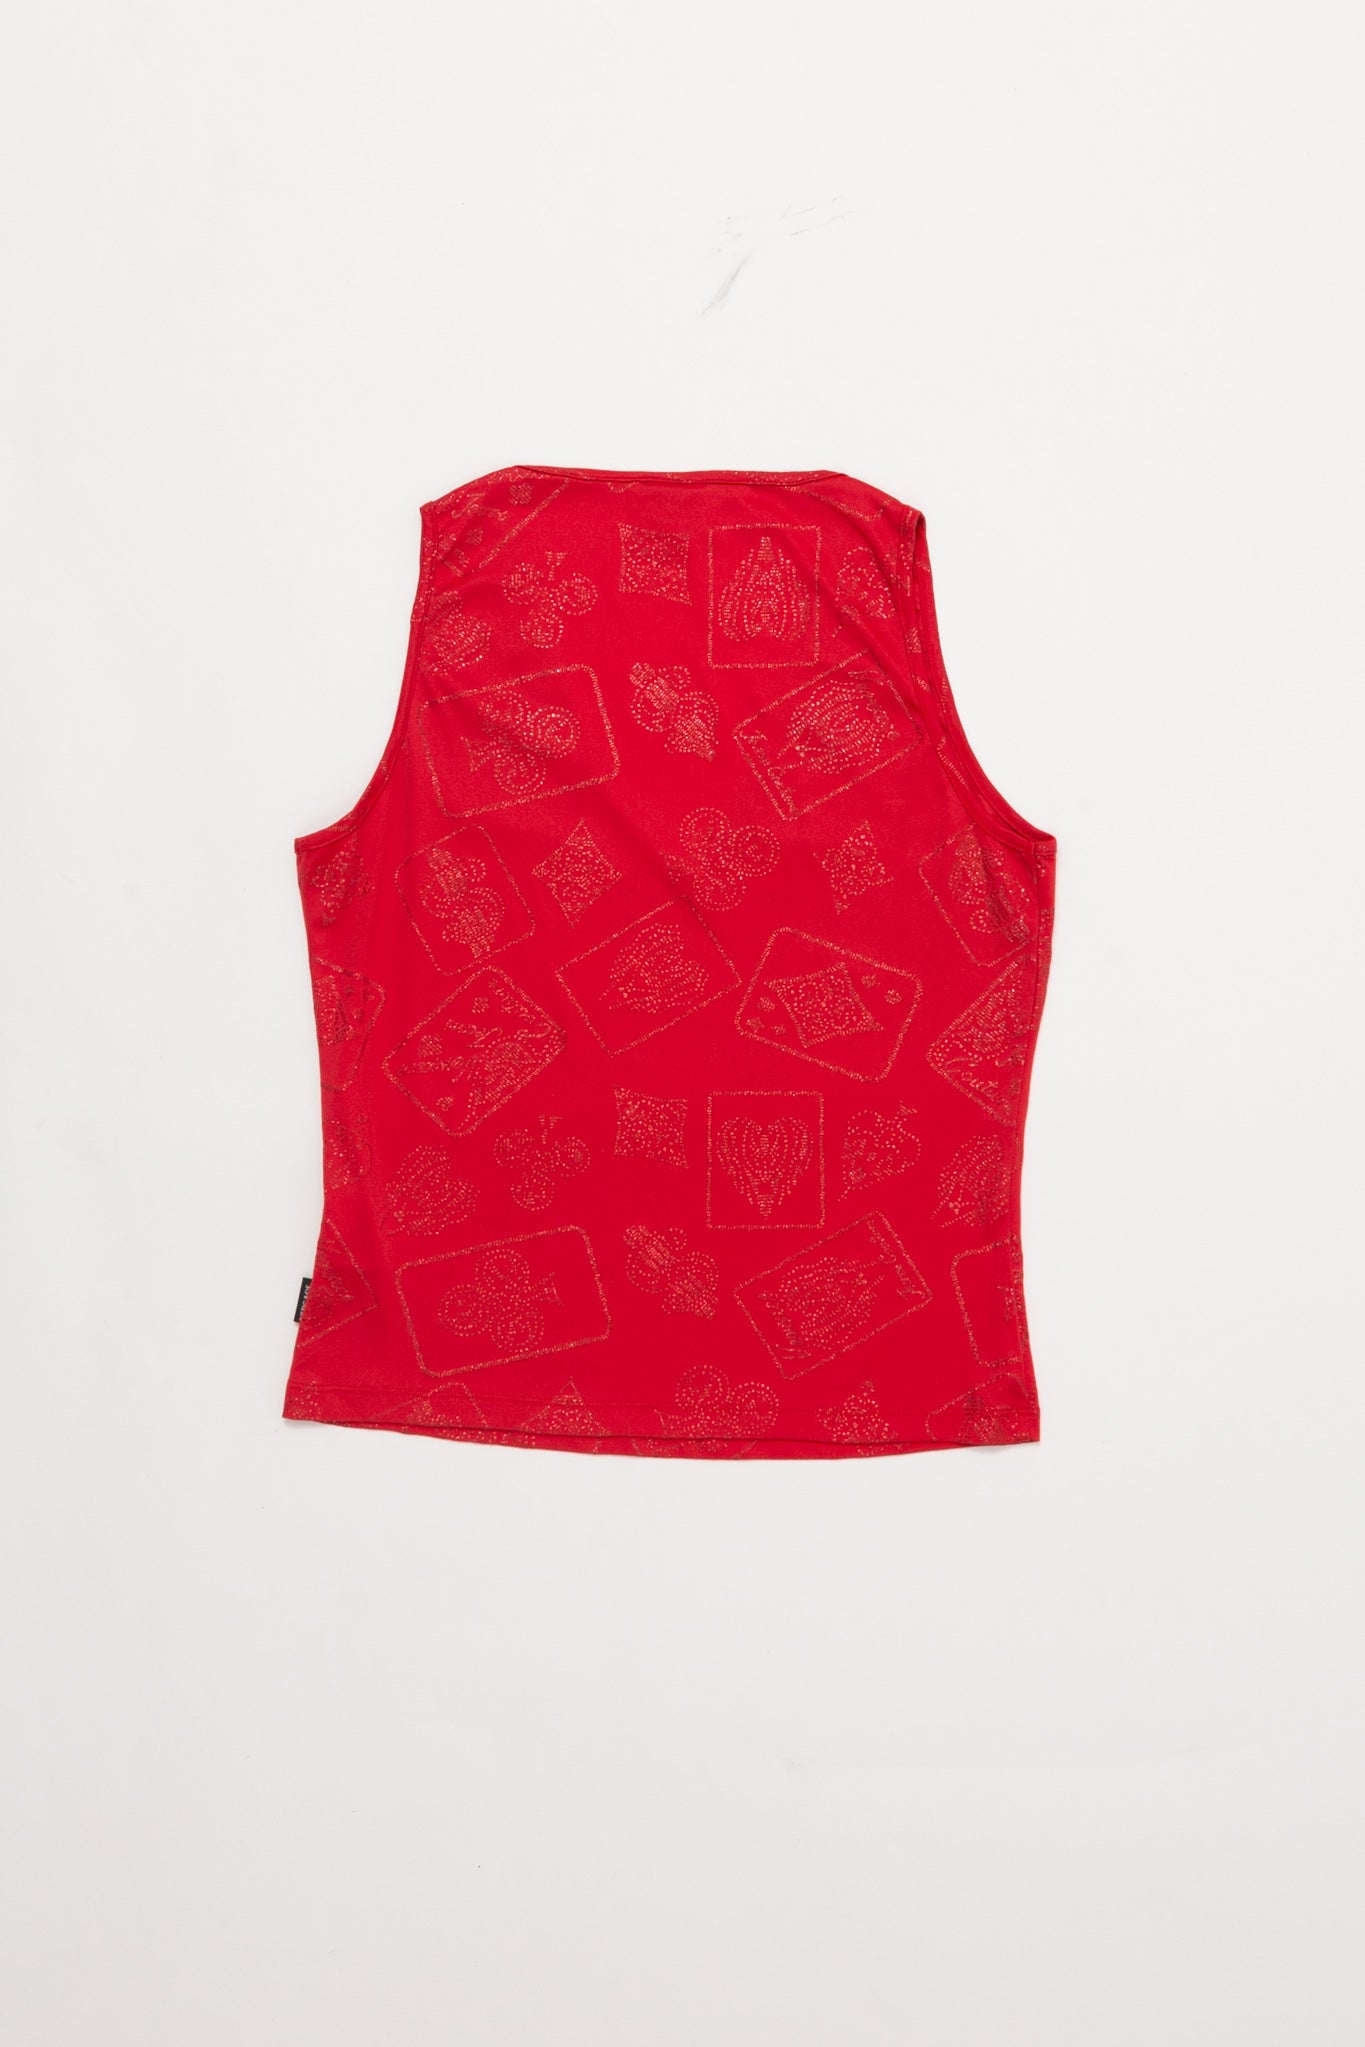 Versace Red Cards Top